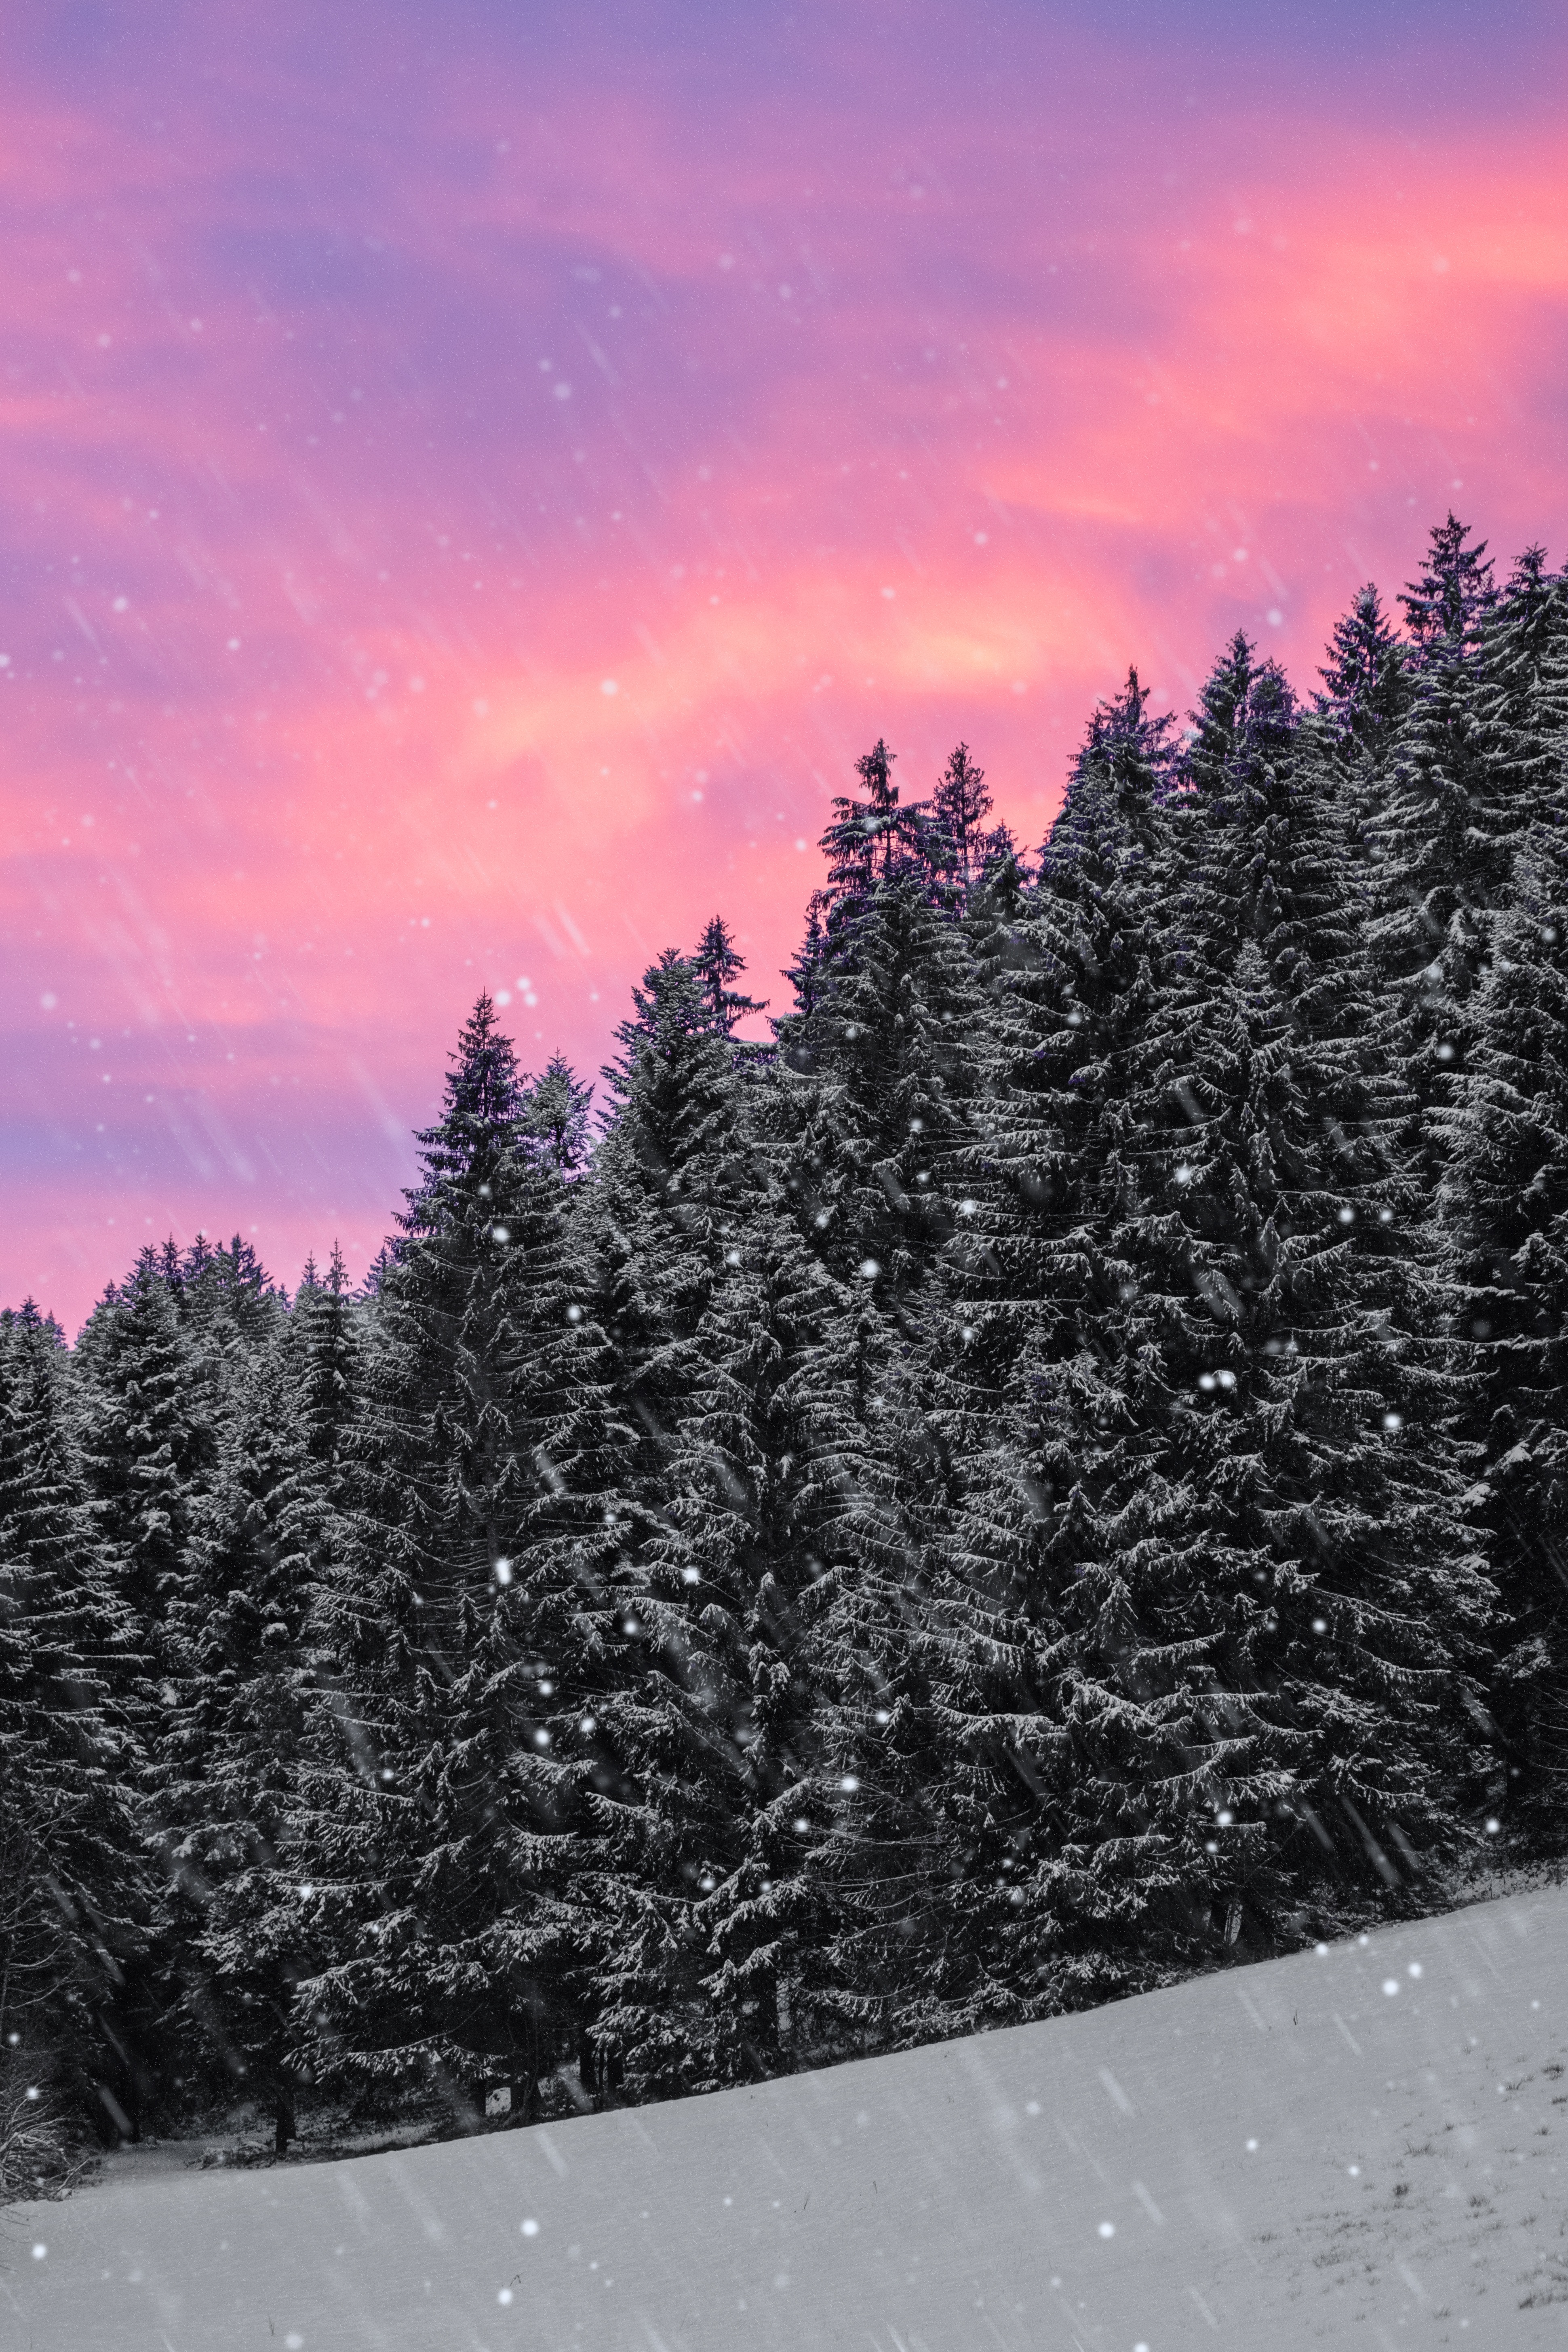 Download Phone wallpaper sky, forest, snow, snowfall